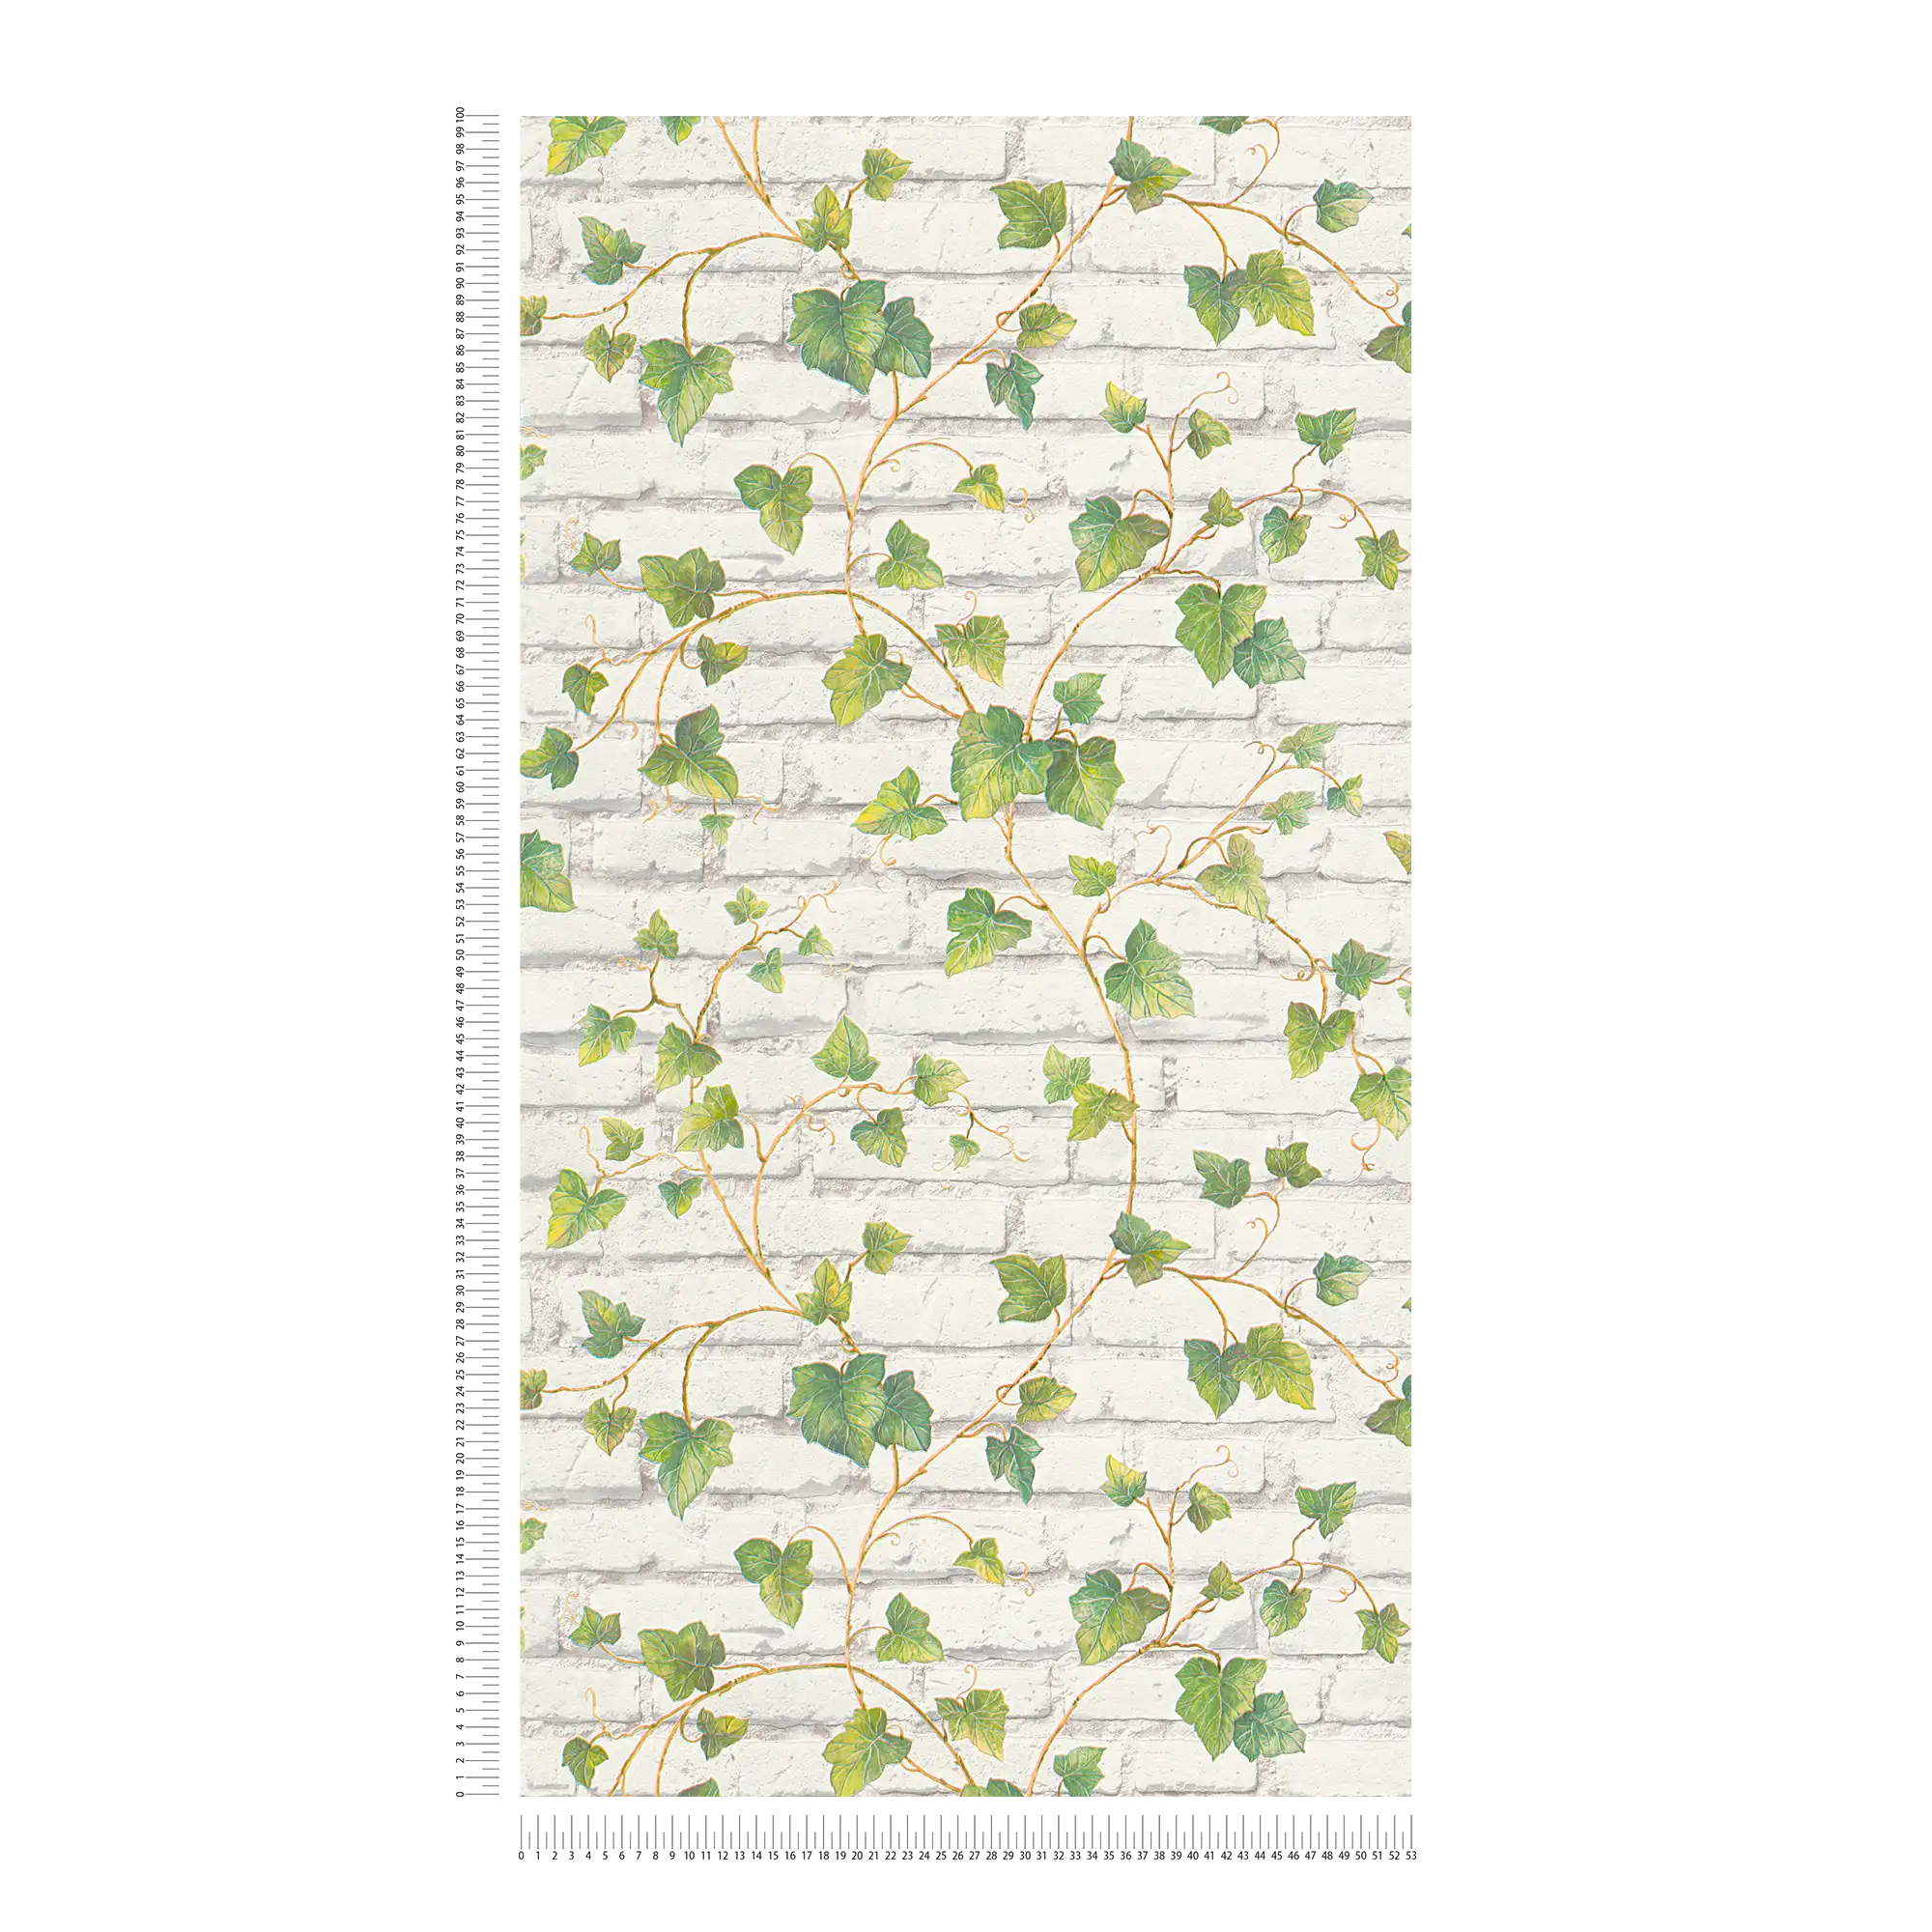             Motif wallpaper with white brick wall and ivy vines - green, white, brown
        